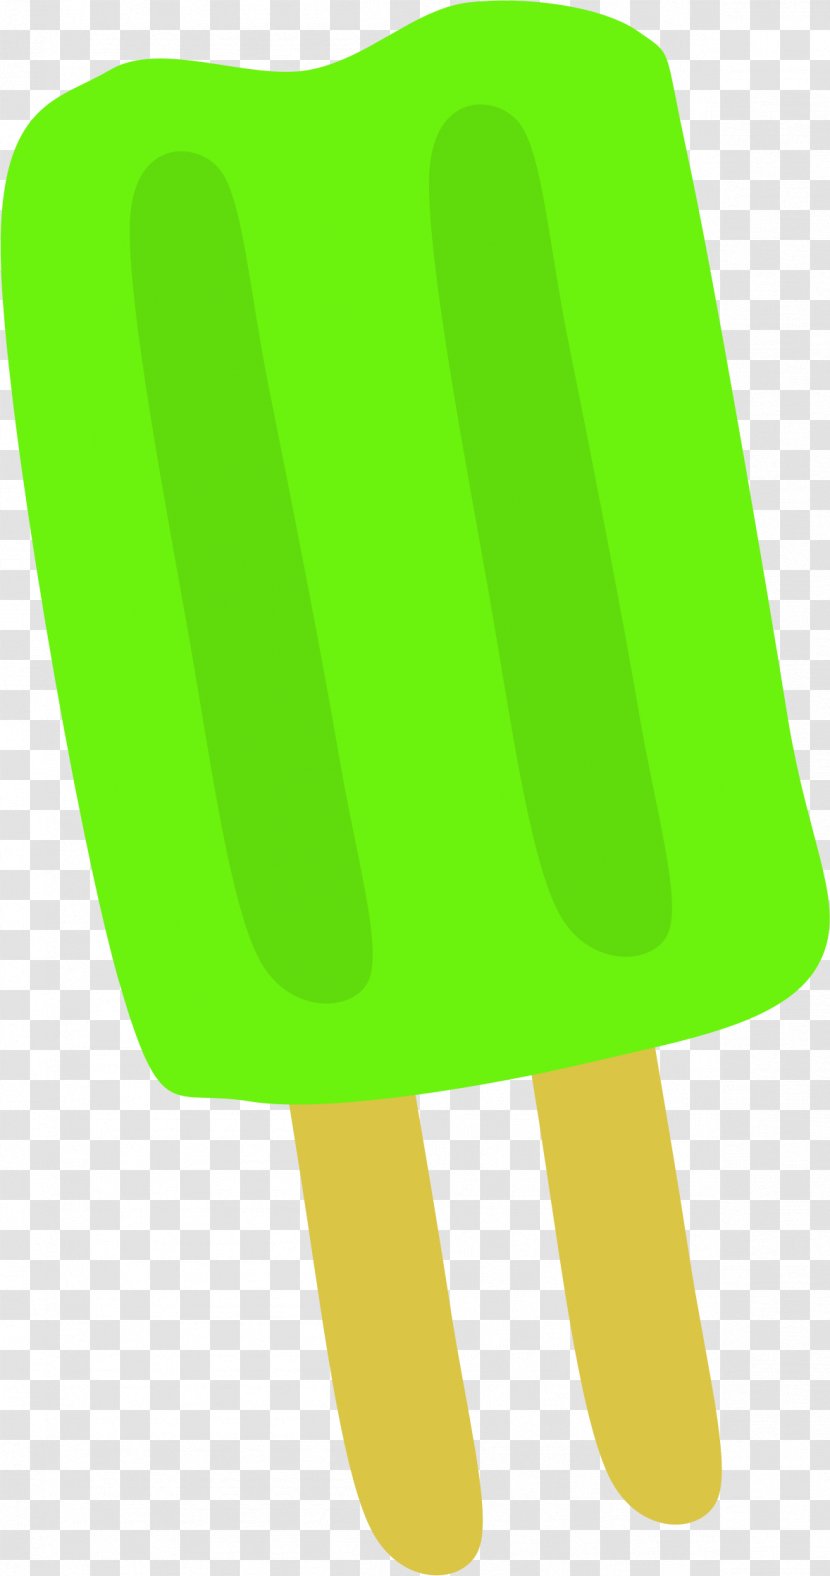 Ice Cream Pop Clip Art - Yellow - Popsicle Cliparts Transparent PNG